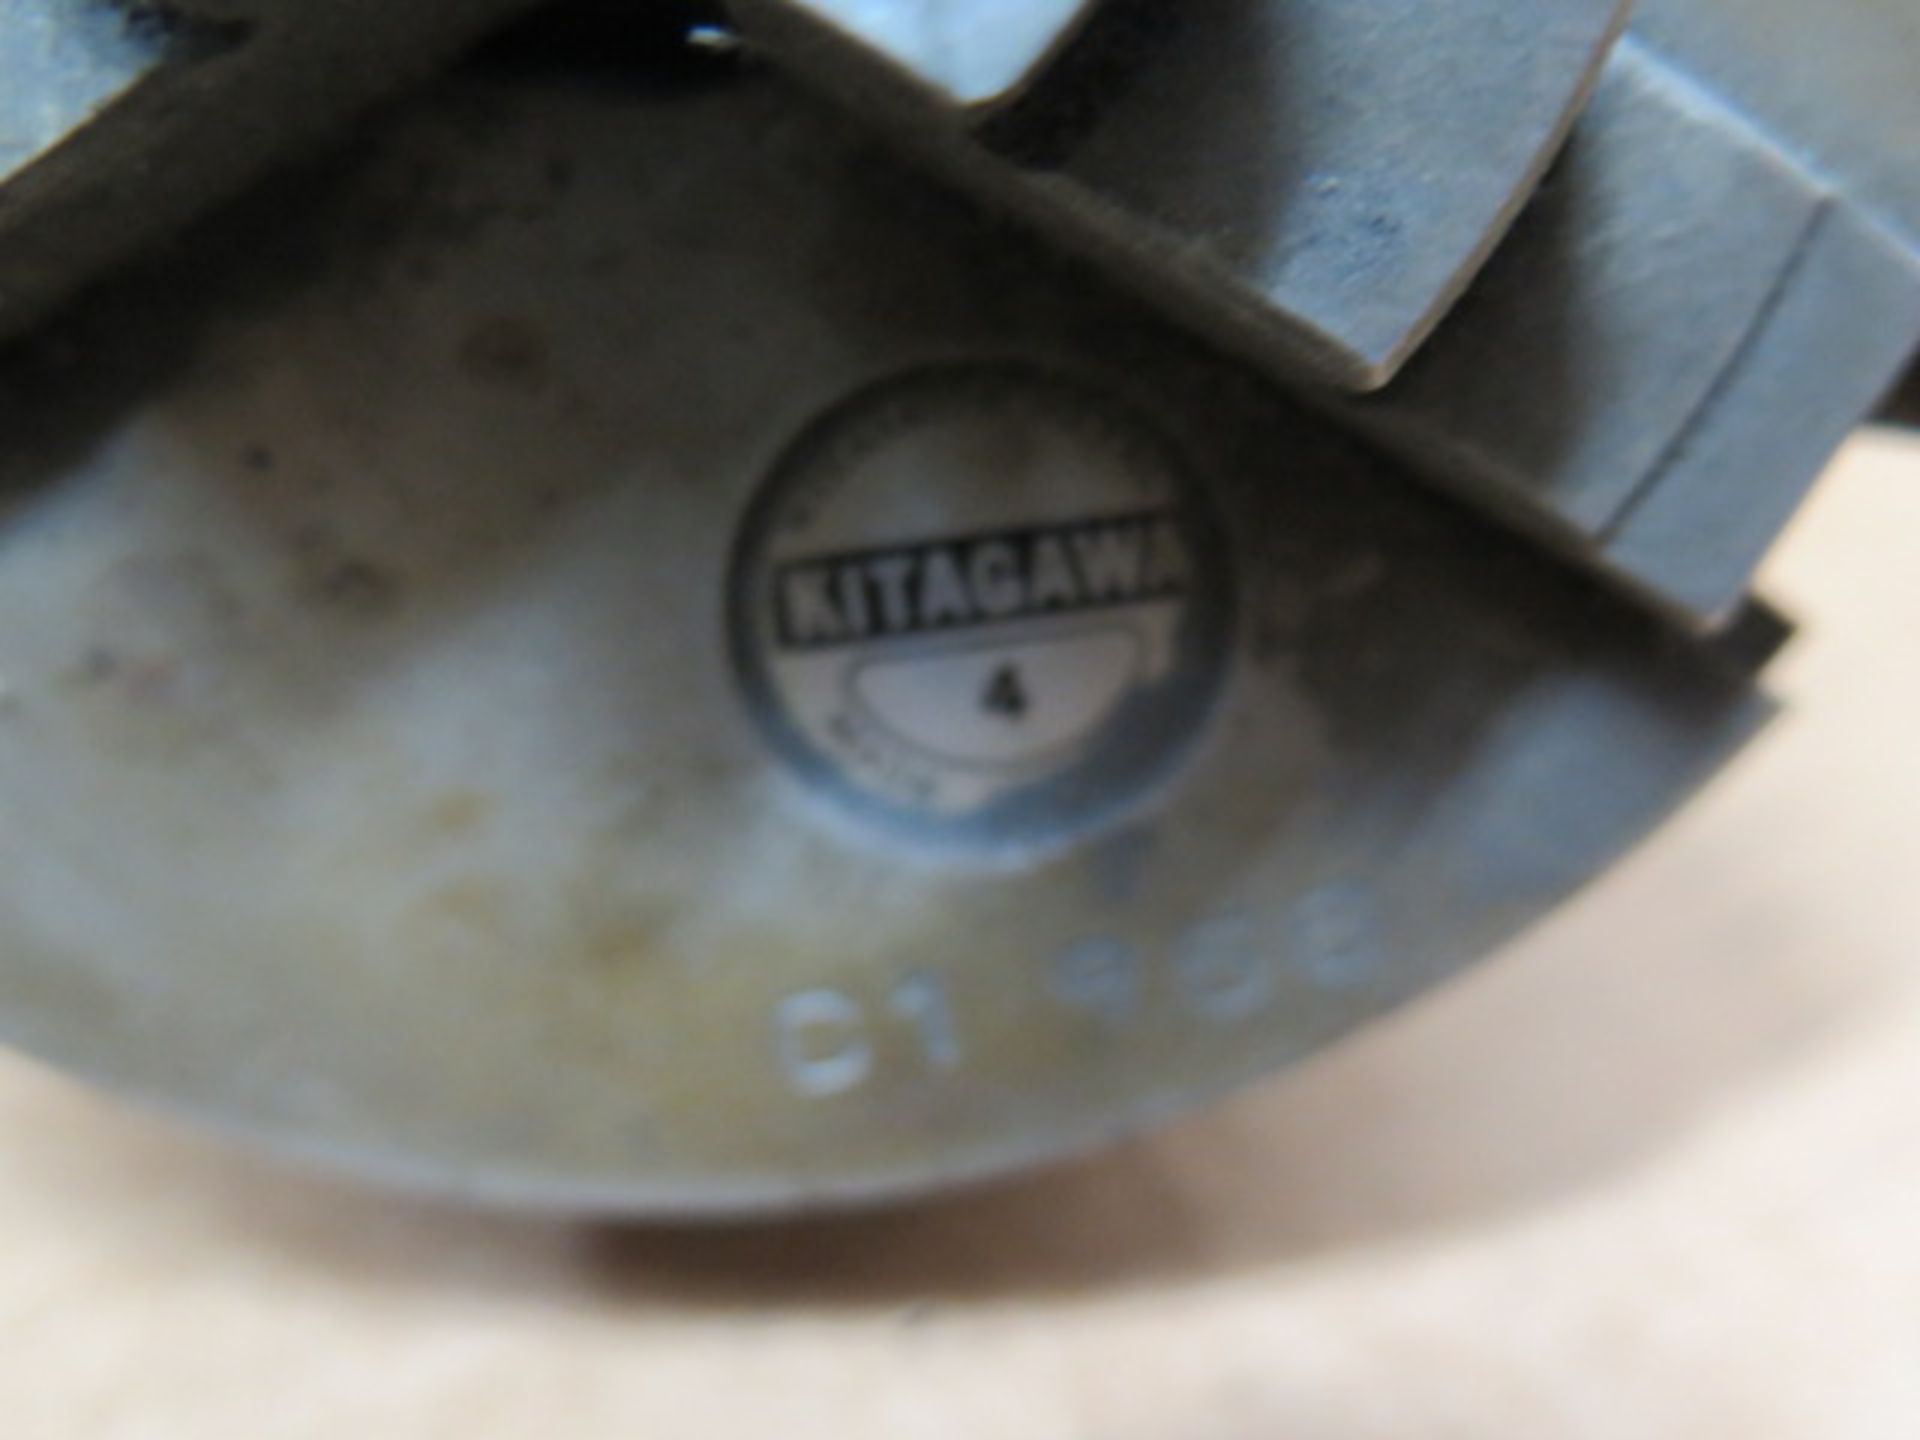 4" 3-Jaw Chuck w/ Taper Shank Adaptor (SOLD AS-IS - NO WARRANTY) - Image 5 of 5